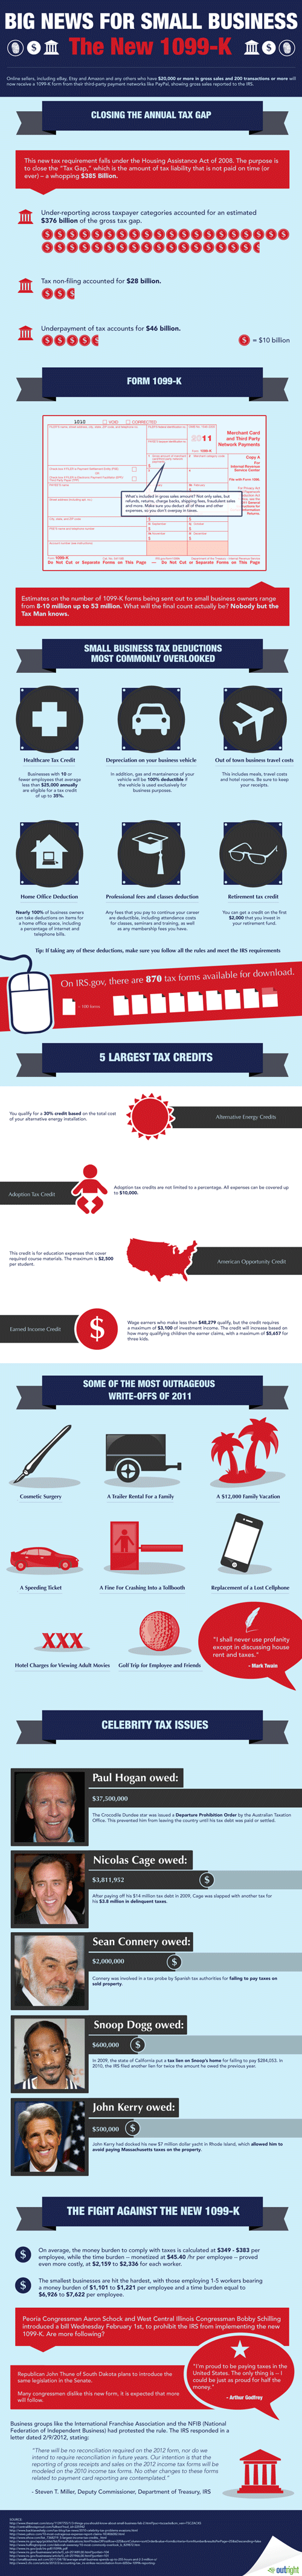 big news for small business owners 1099 K Infographic